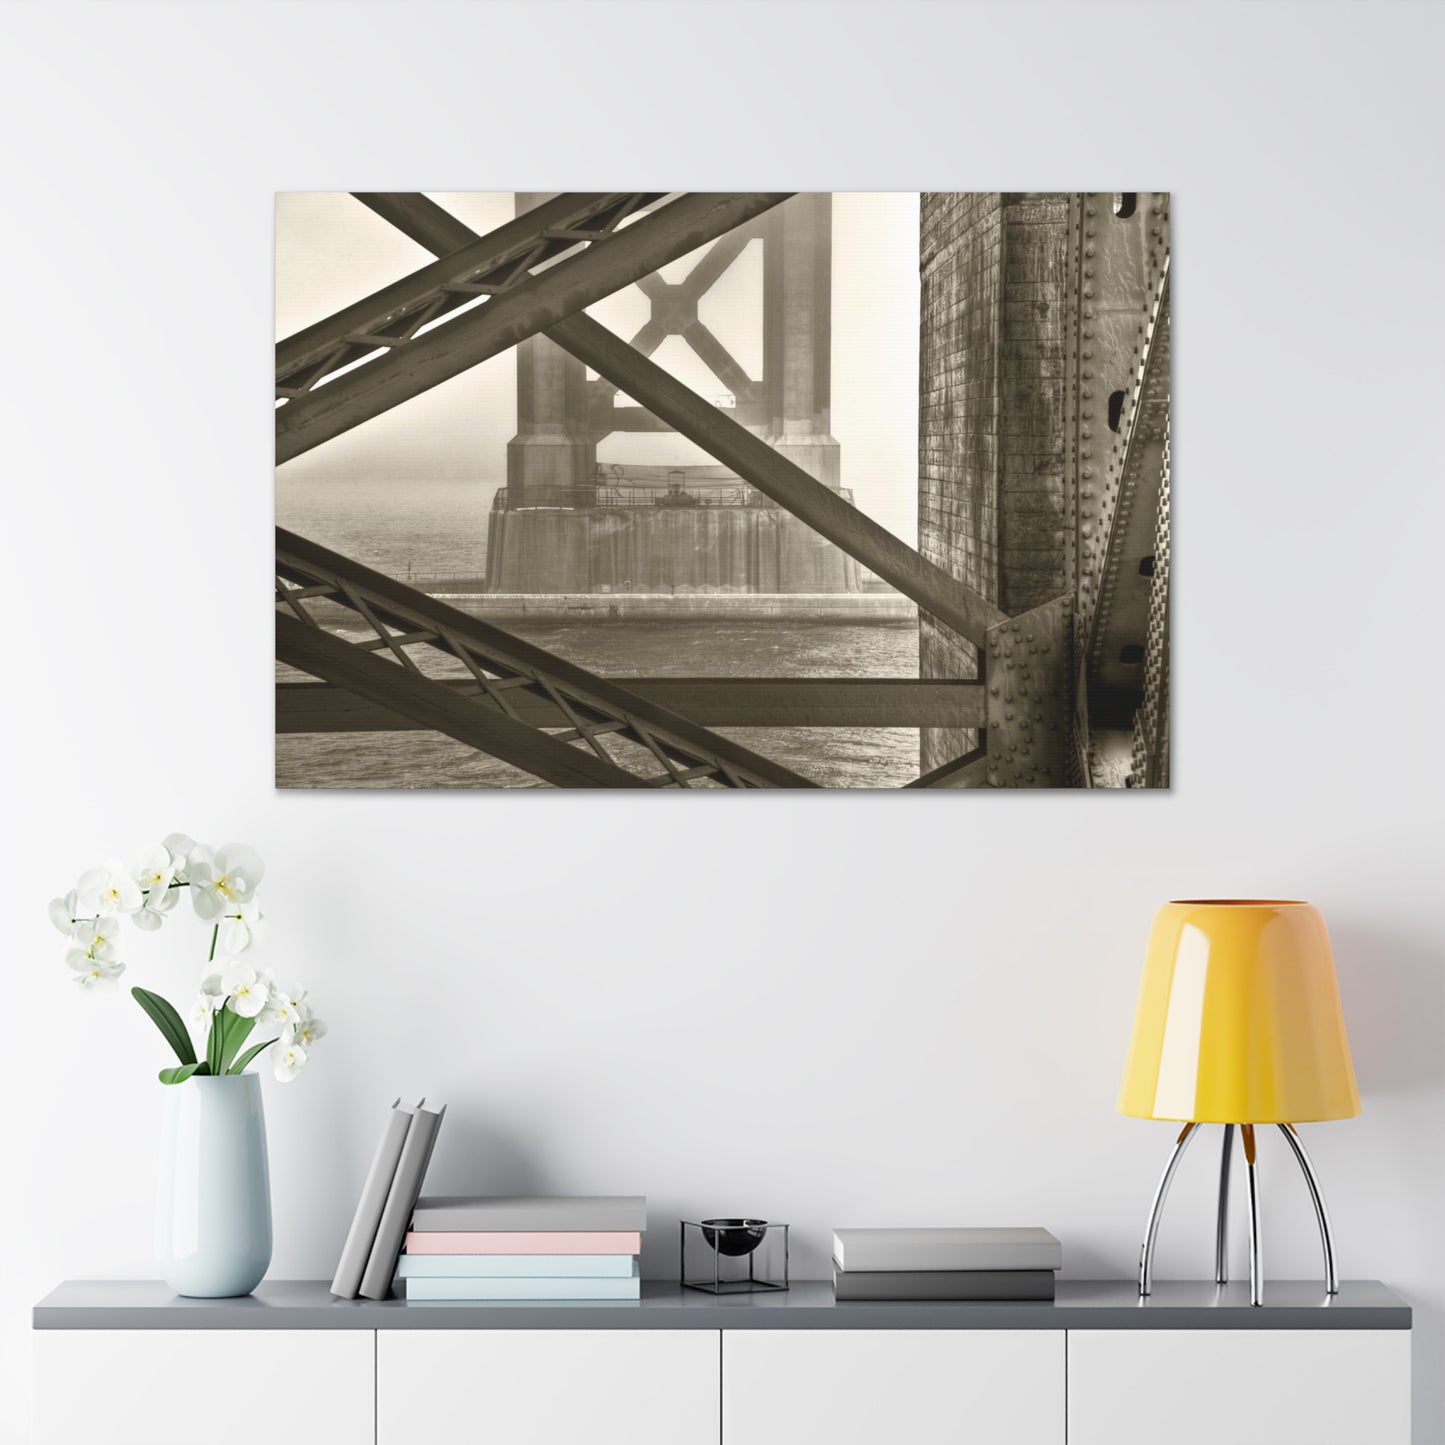 Canvas Print Of Golden Gate Bridge Towers In San Francisco For Wall Art